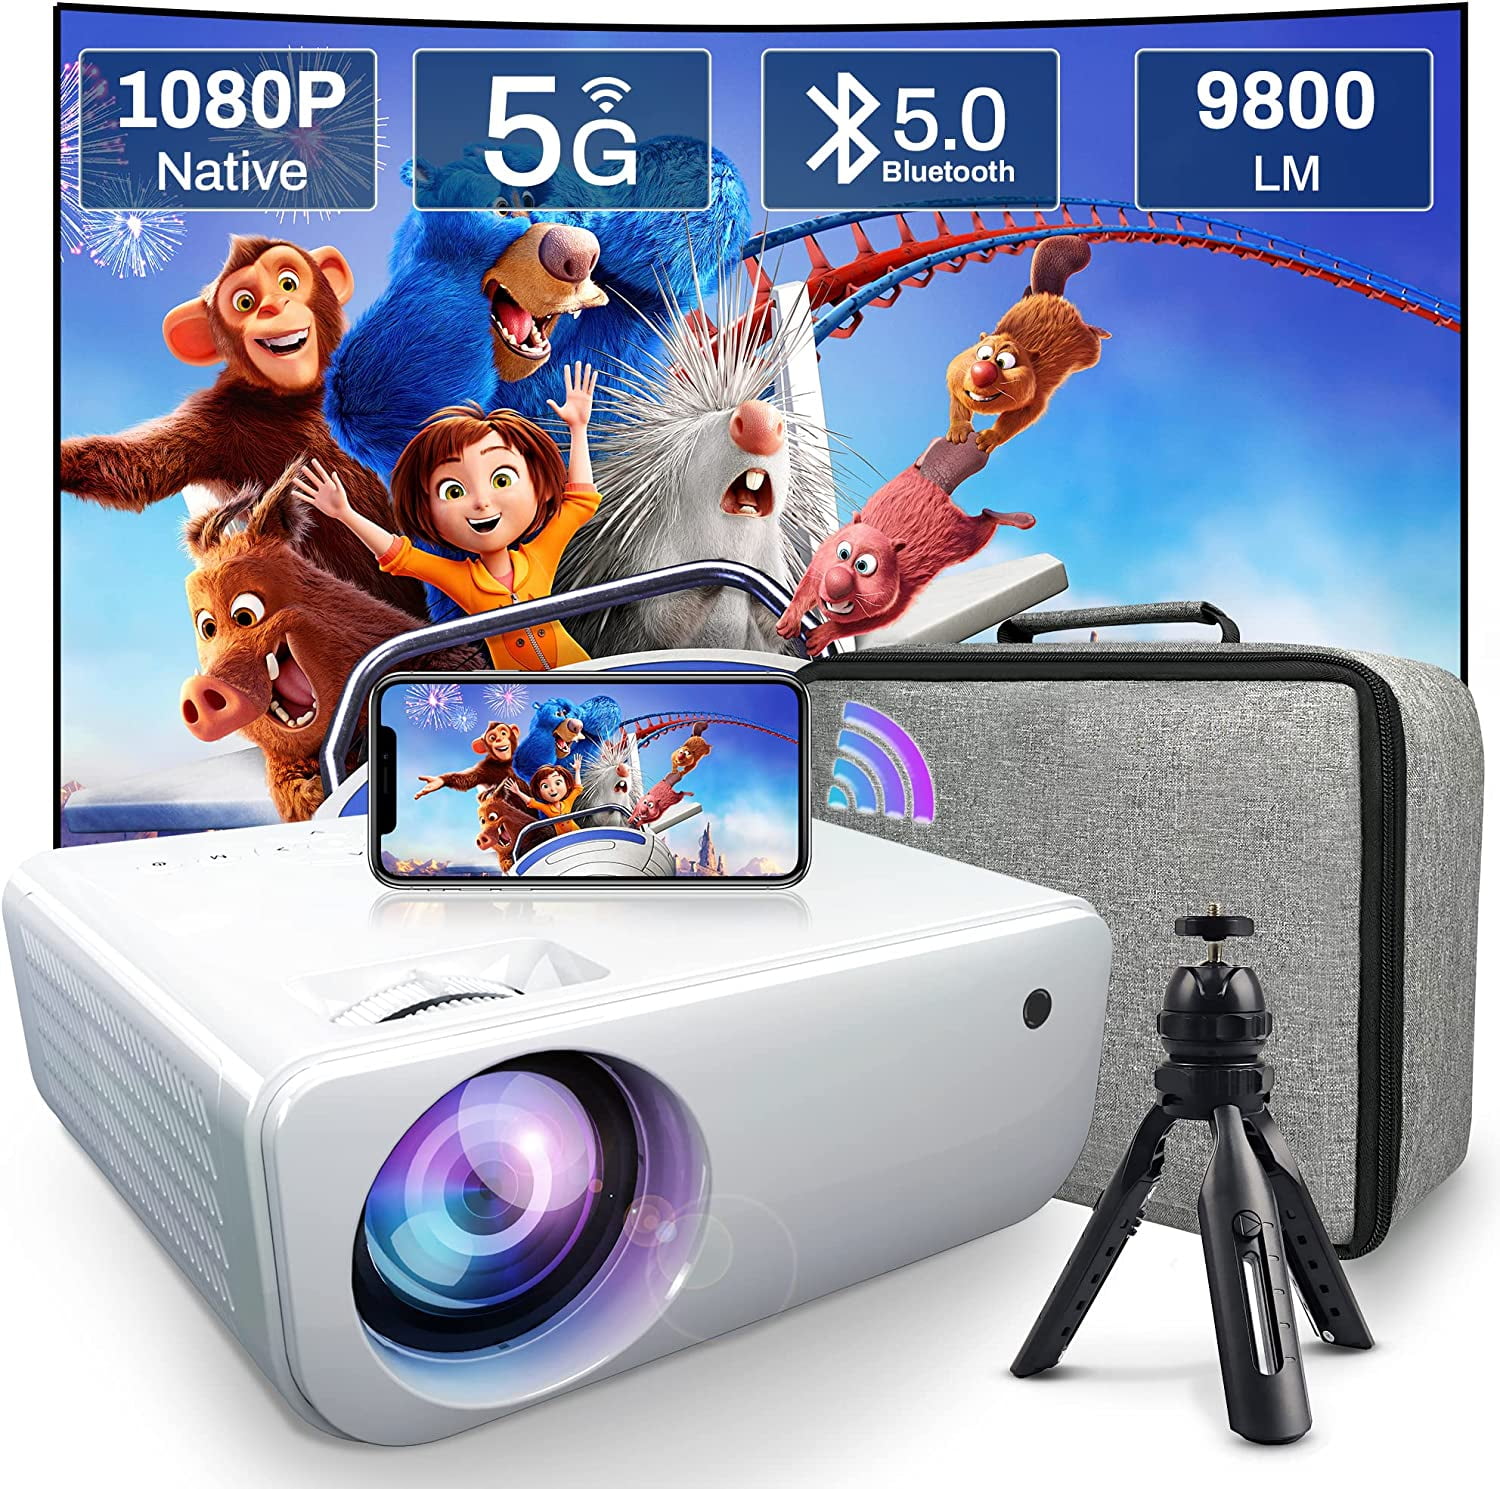 Native 1080P WiFi Bluetooth Projector Built in DVD Player, KERDOM Portable  DVD Projector, Mini Video Movie Projector for Outdoor, Zoom  Sleep Timer  Support, Compatible with TV/HDMI/VGA/AV/USB/TF